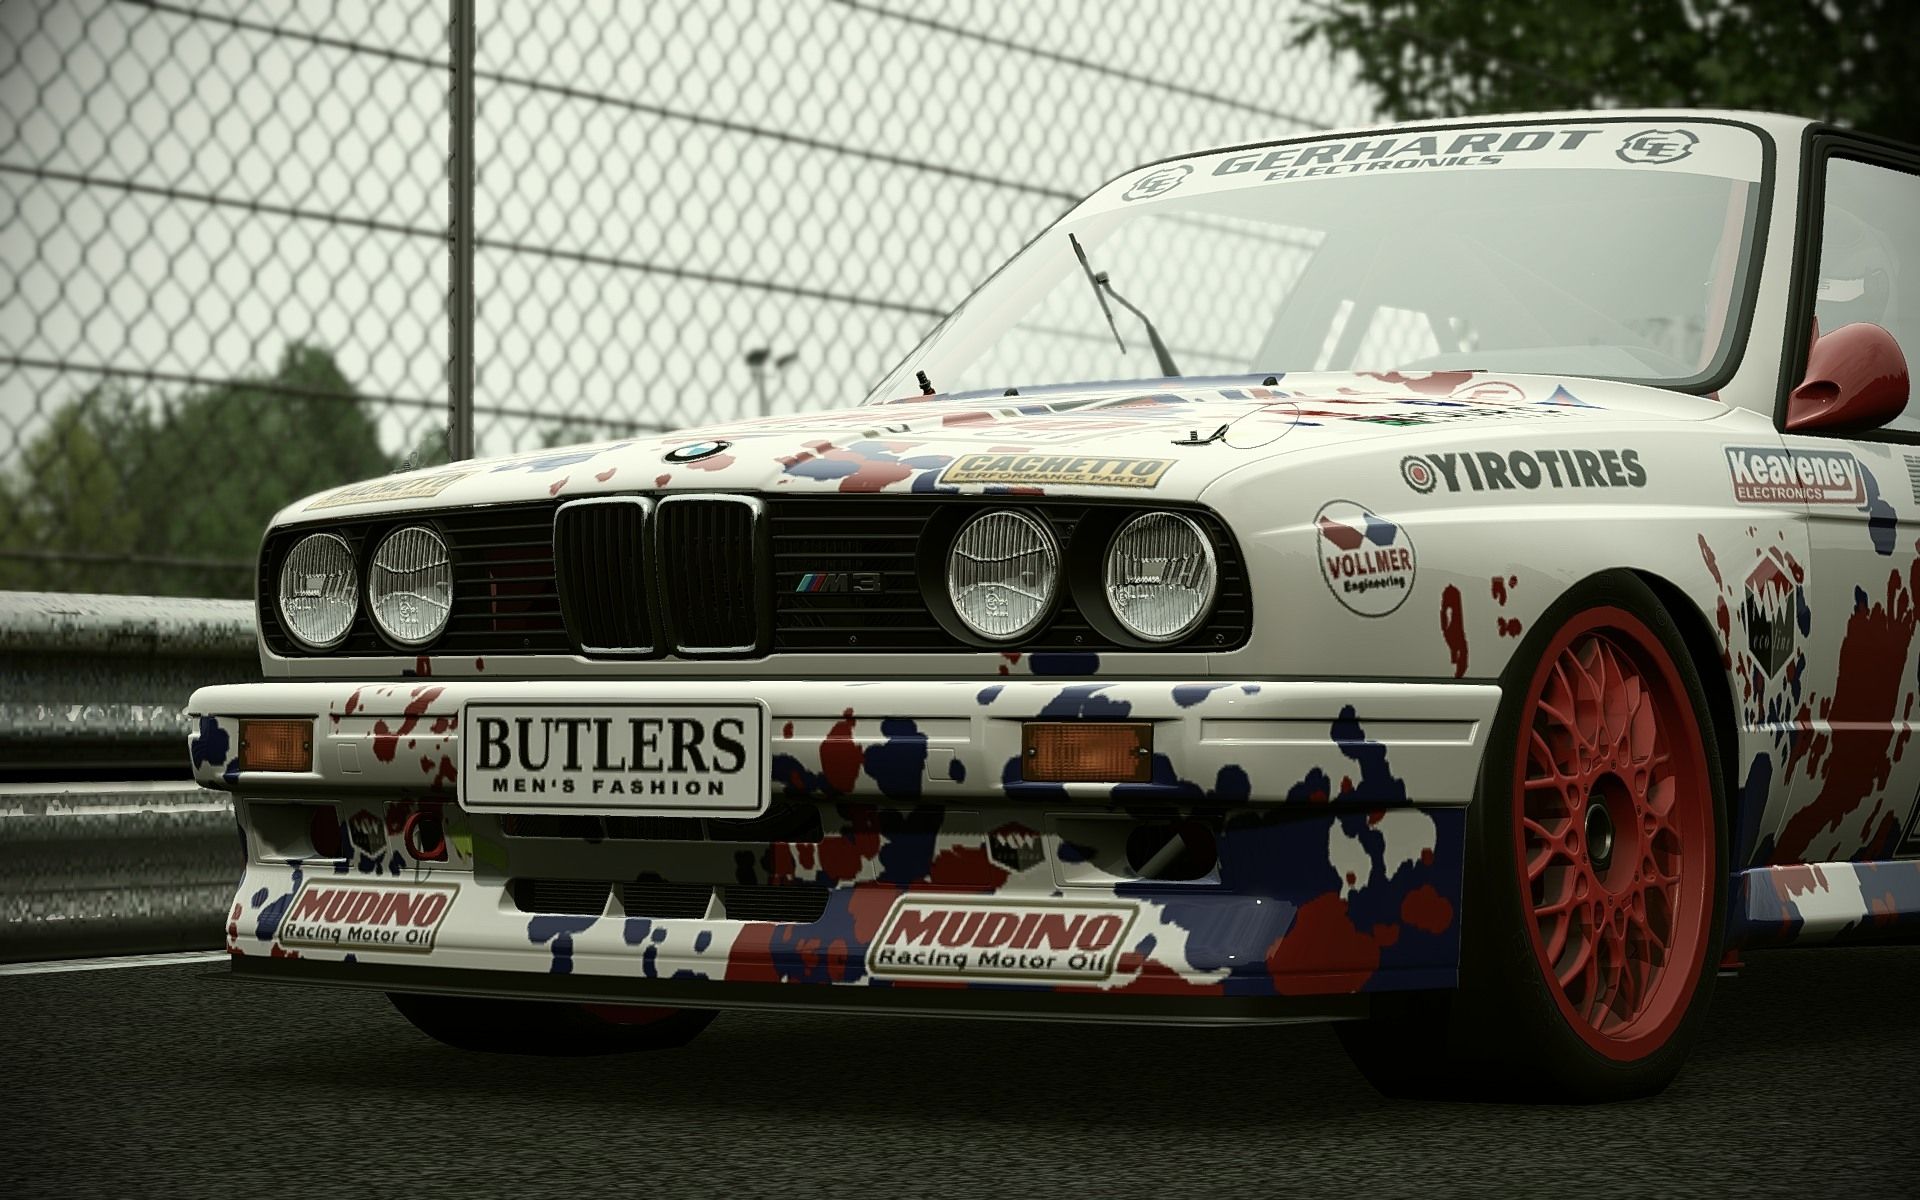 Project CARS - 3